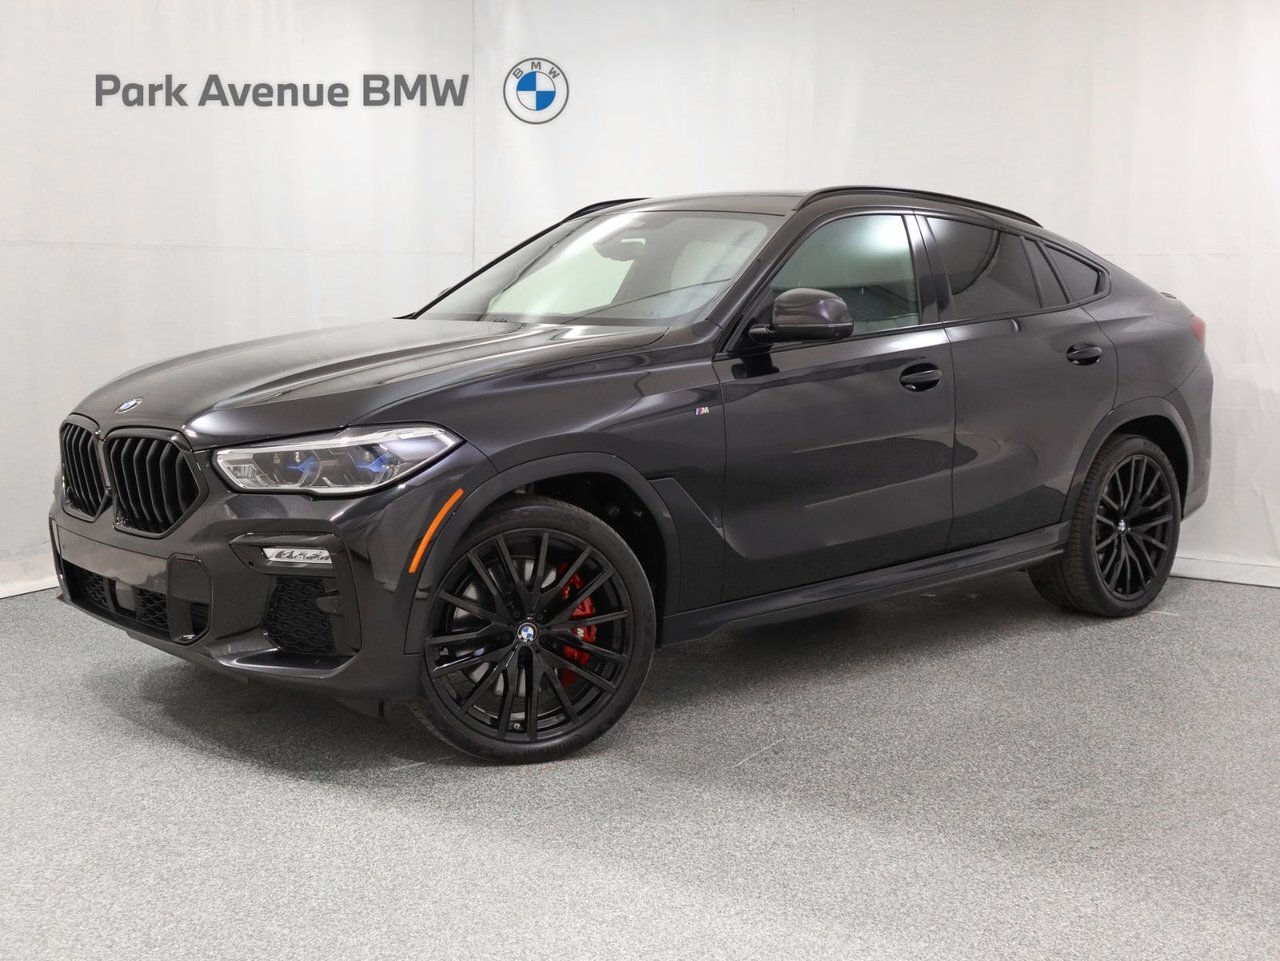 2021 BMW X6 M50i Excellence Package / Bowers and Wilkins / Exc